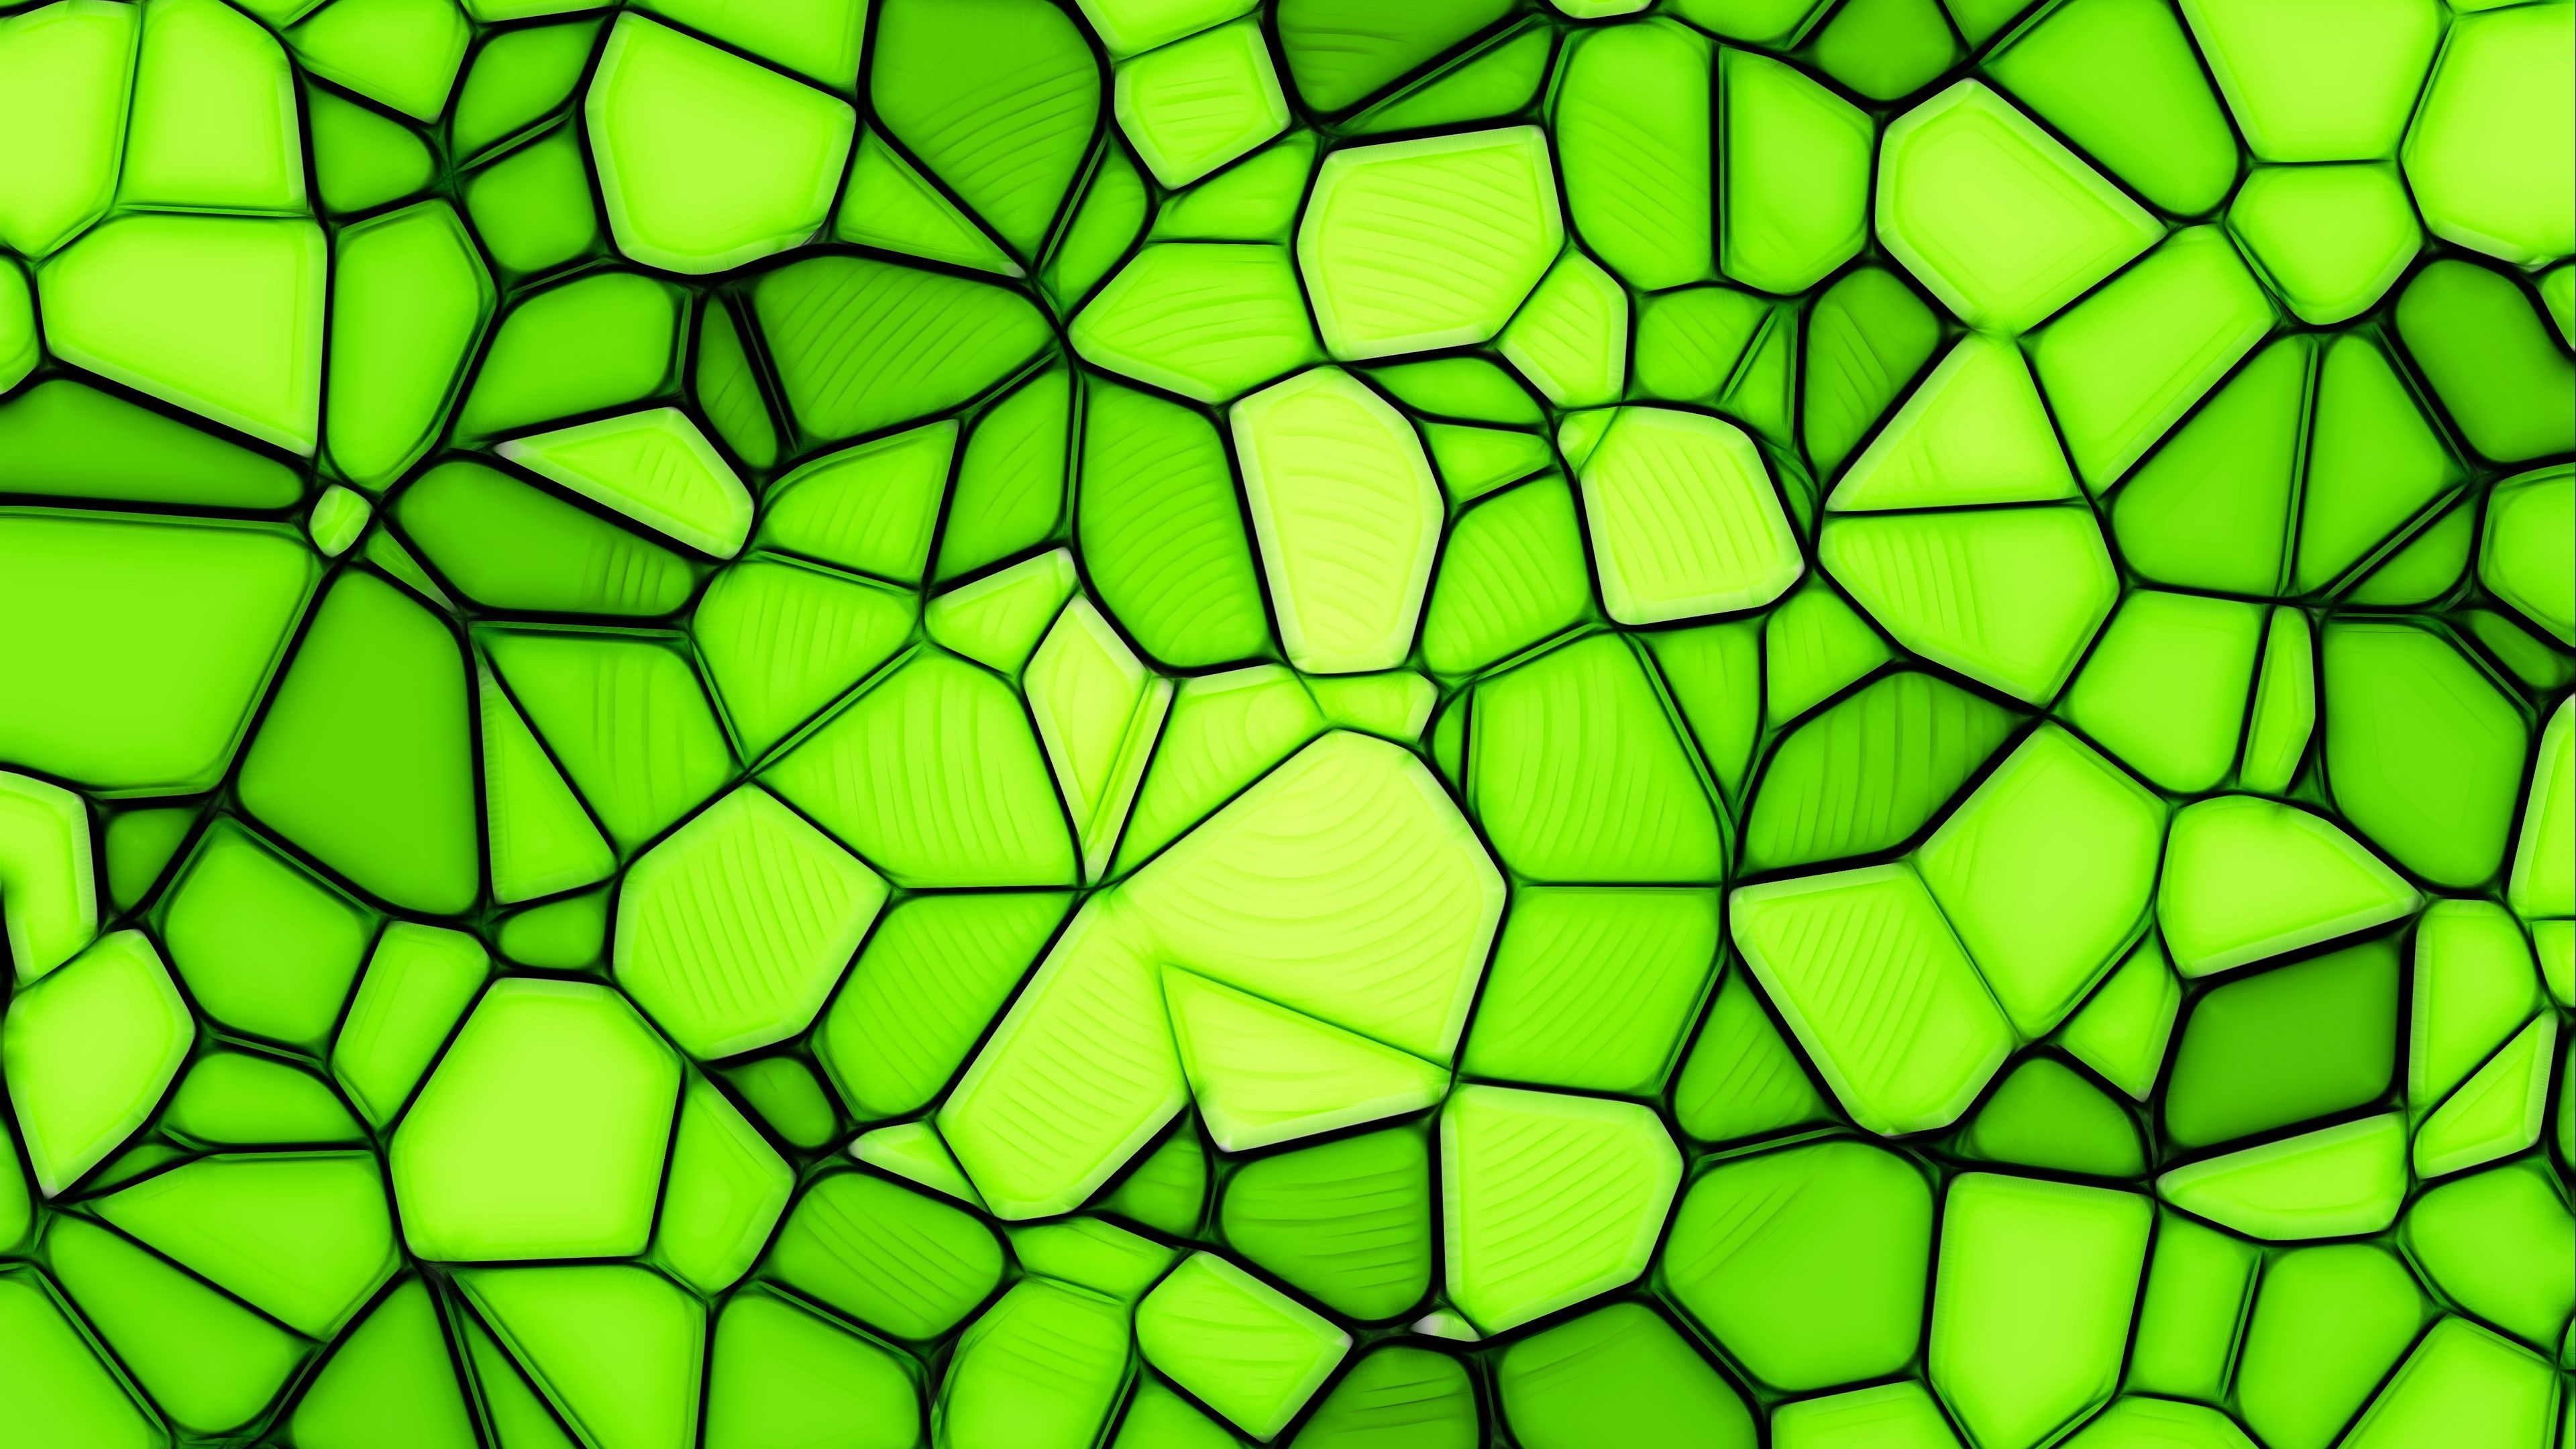 Download wallpapers 3840x2160 squares, triangles, green, light